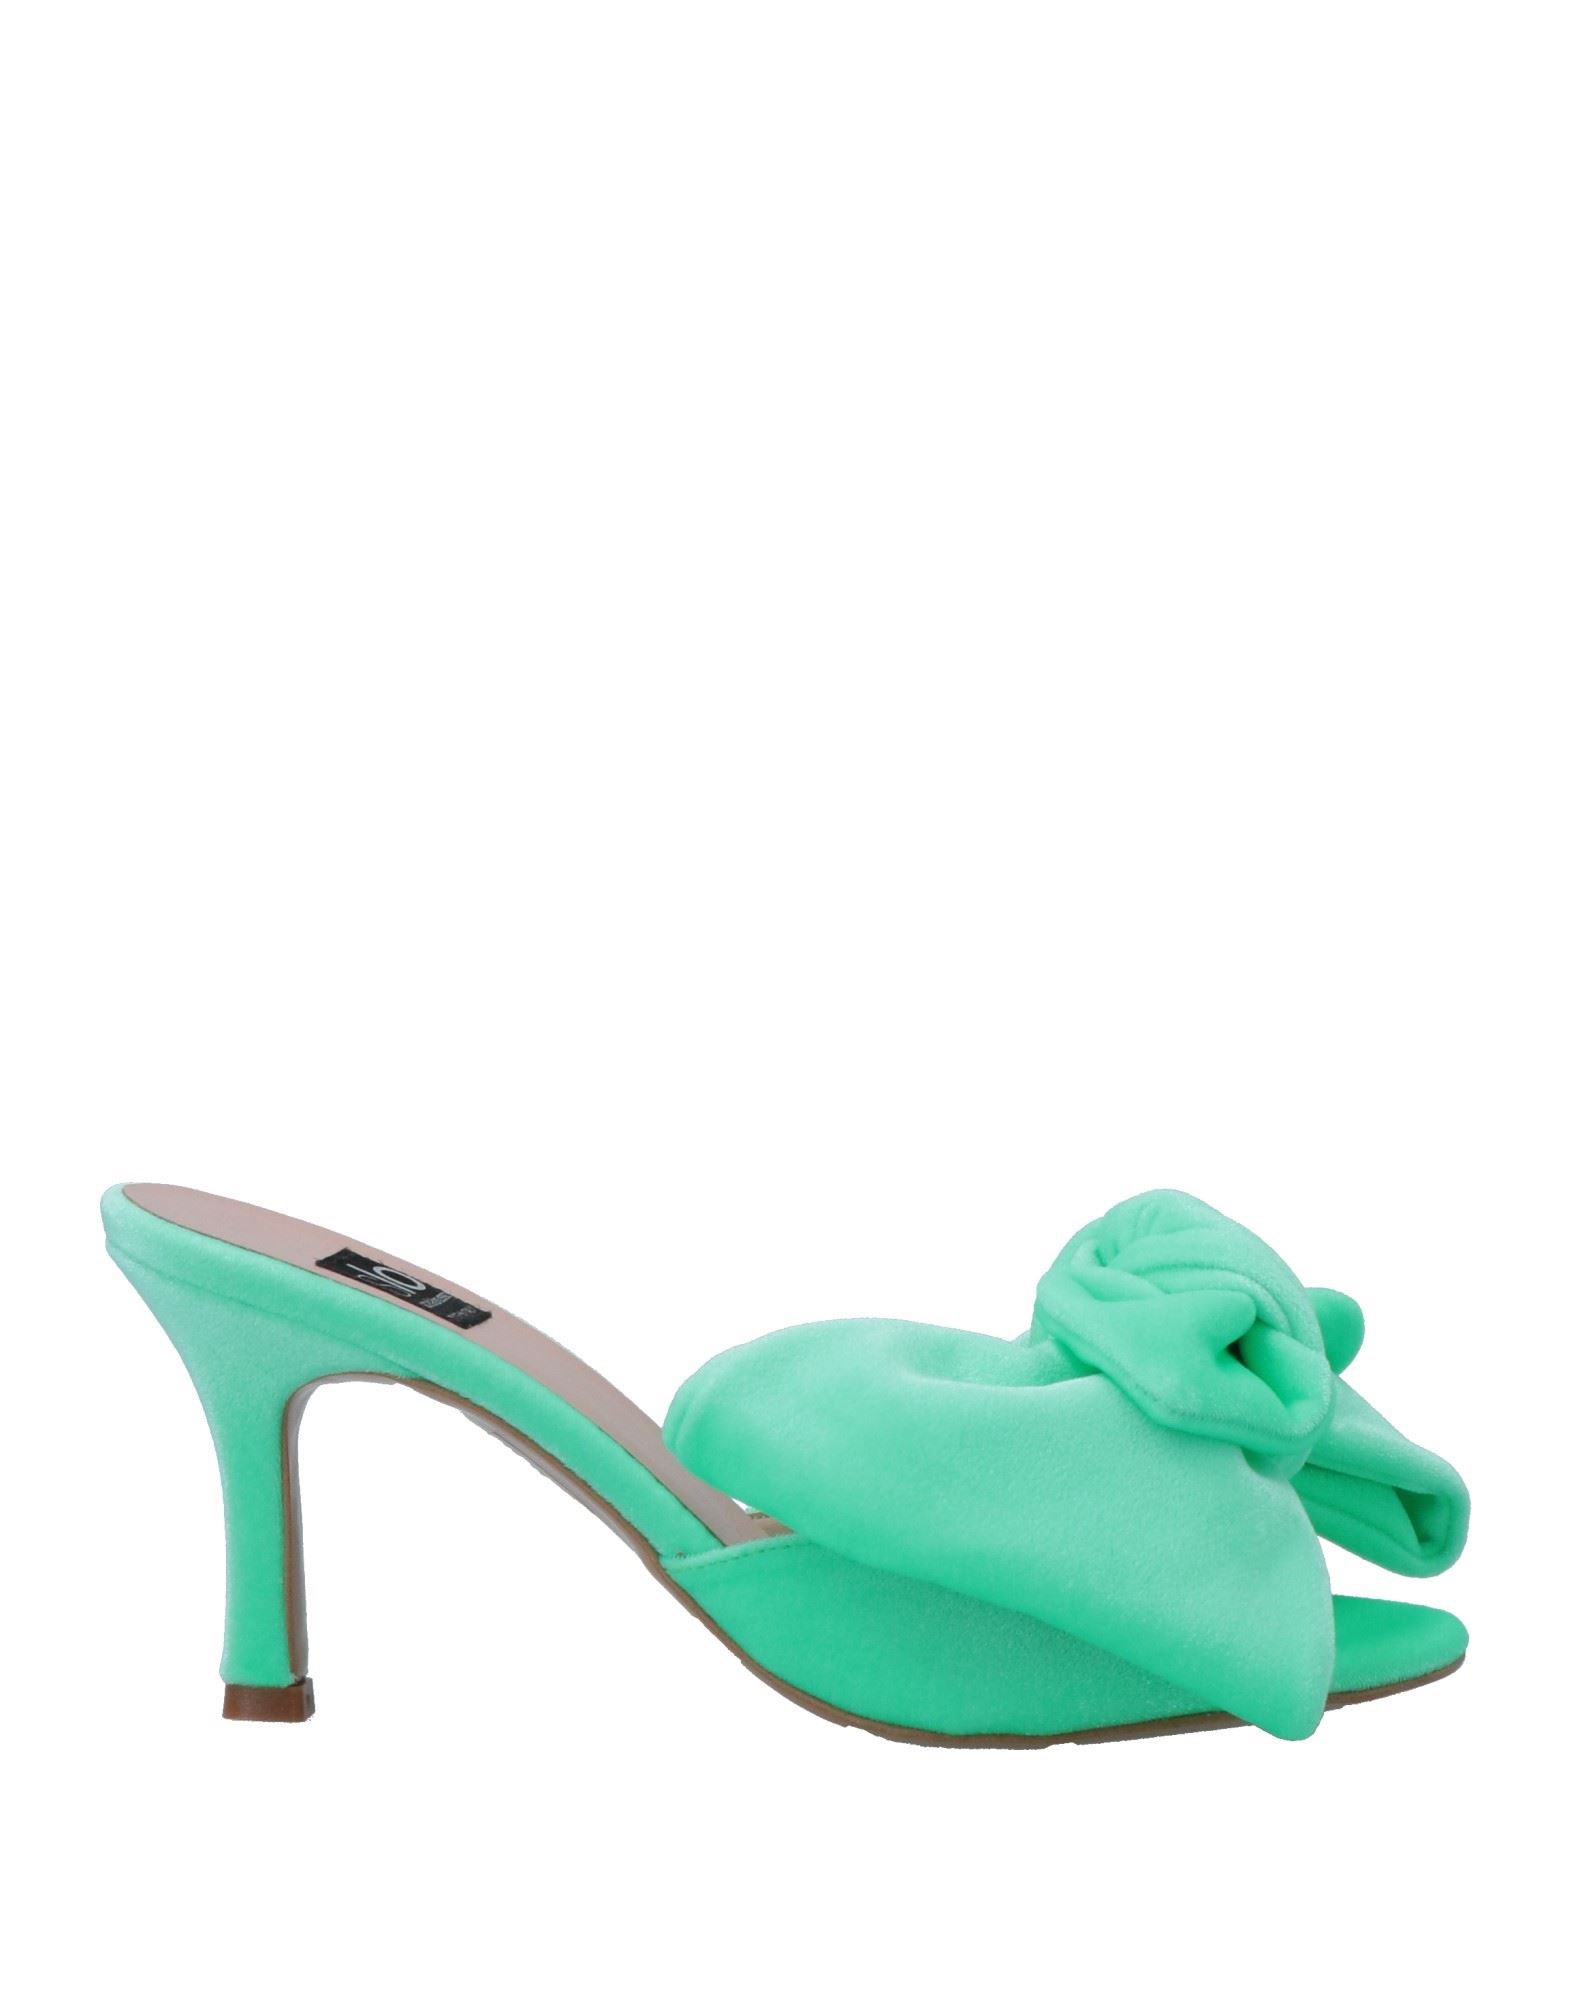 Islo Isabella Lorusso Sandals In Green